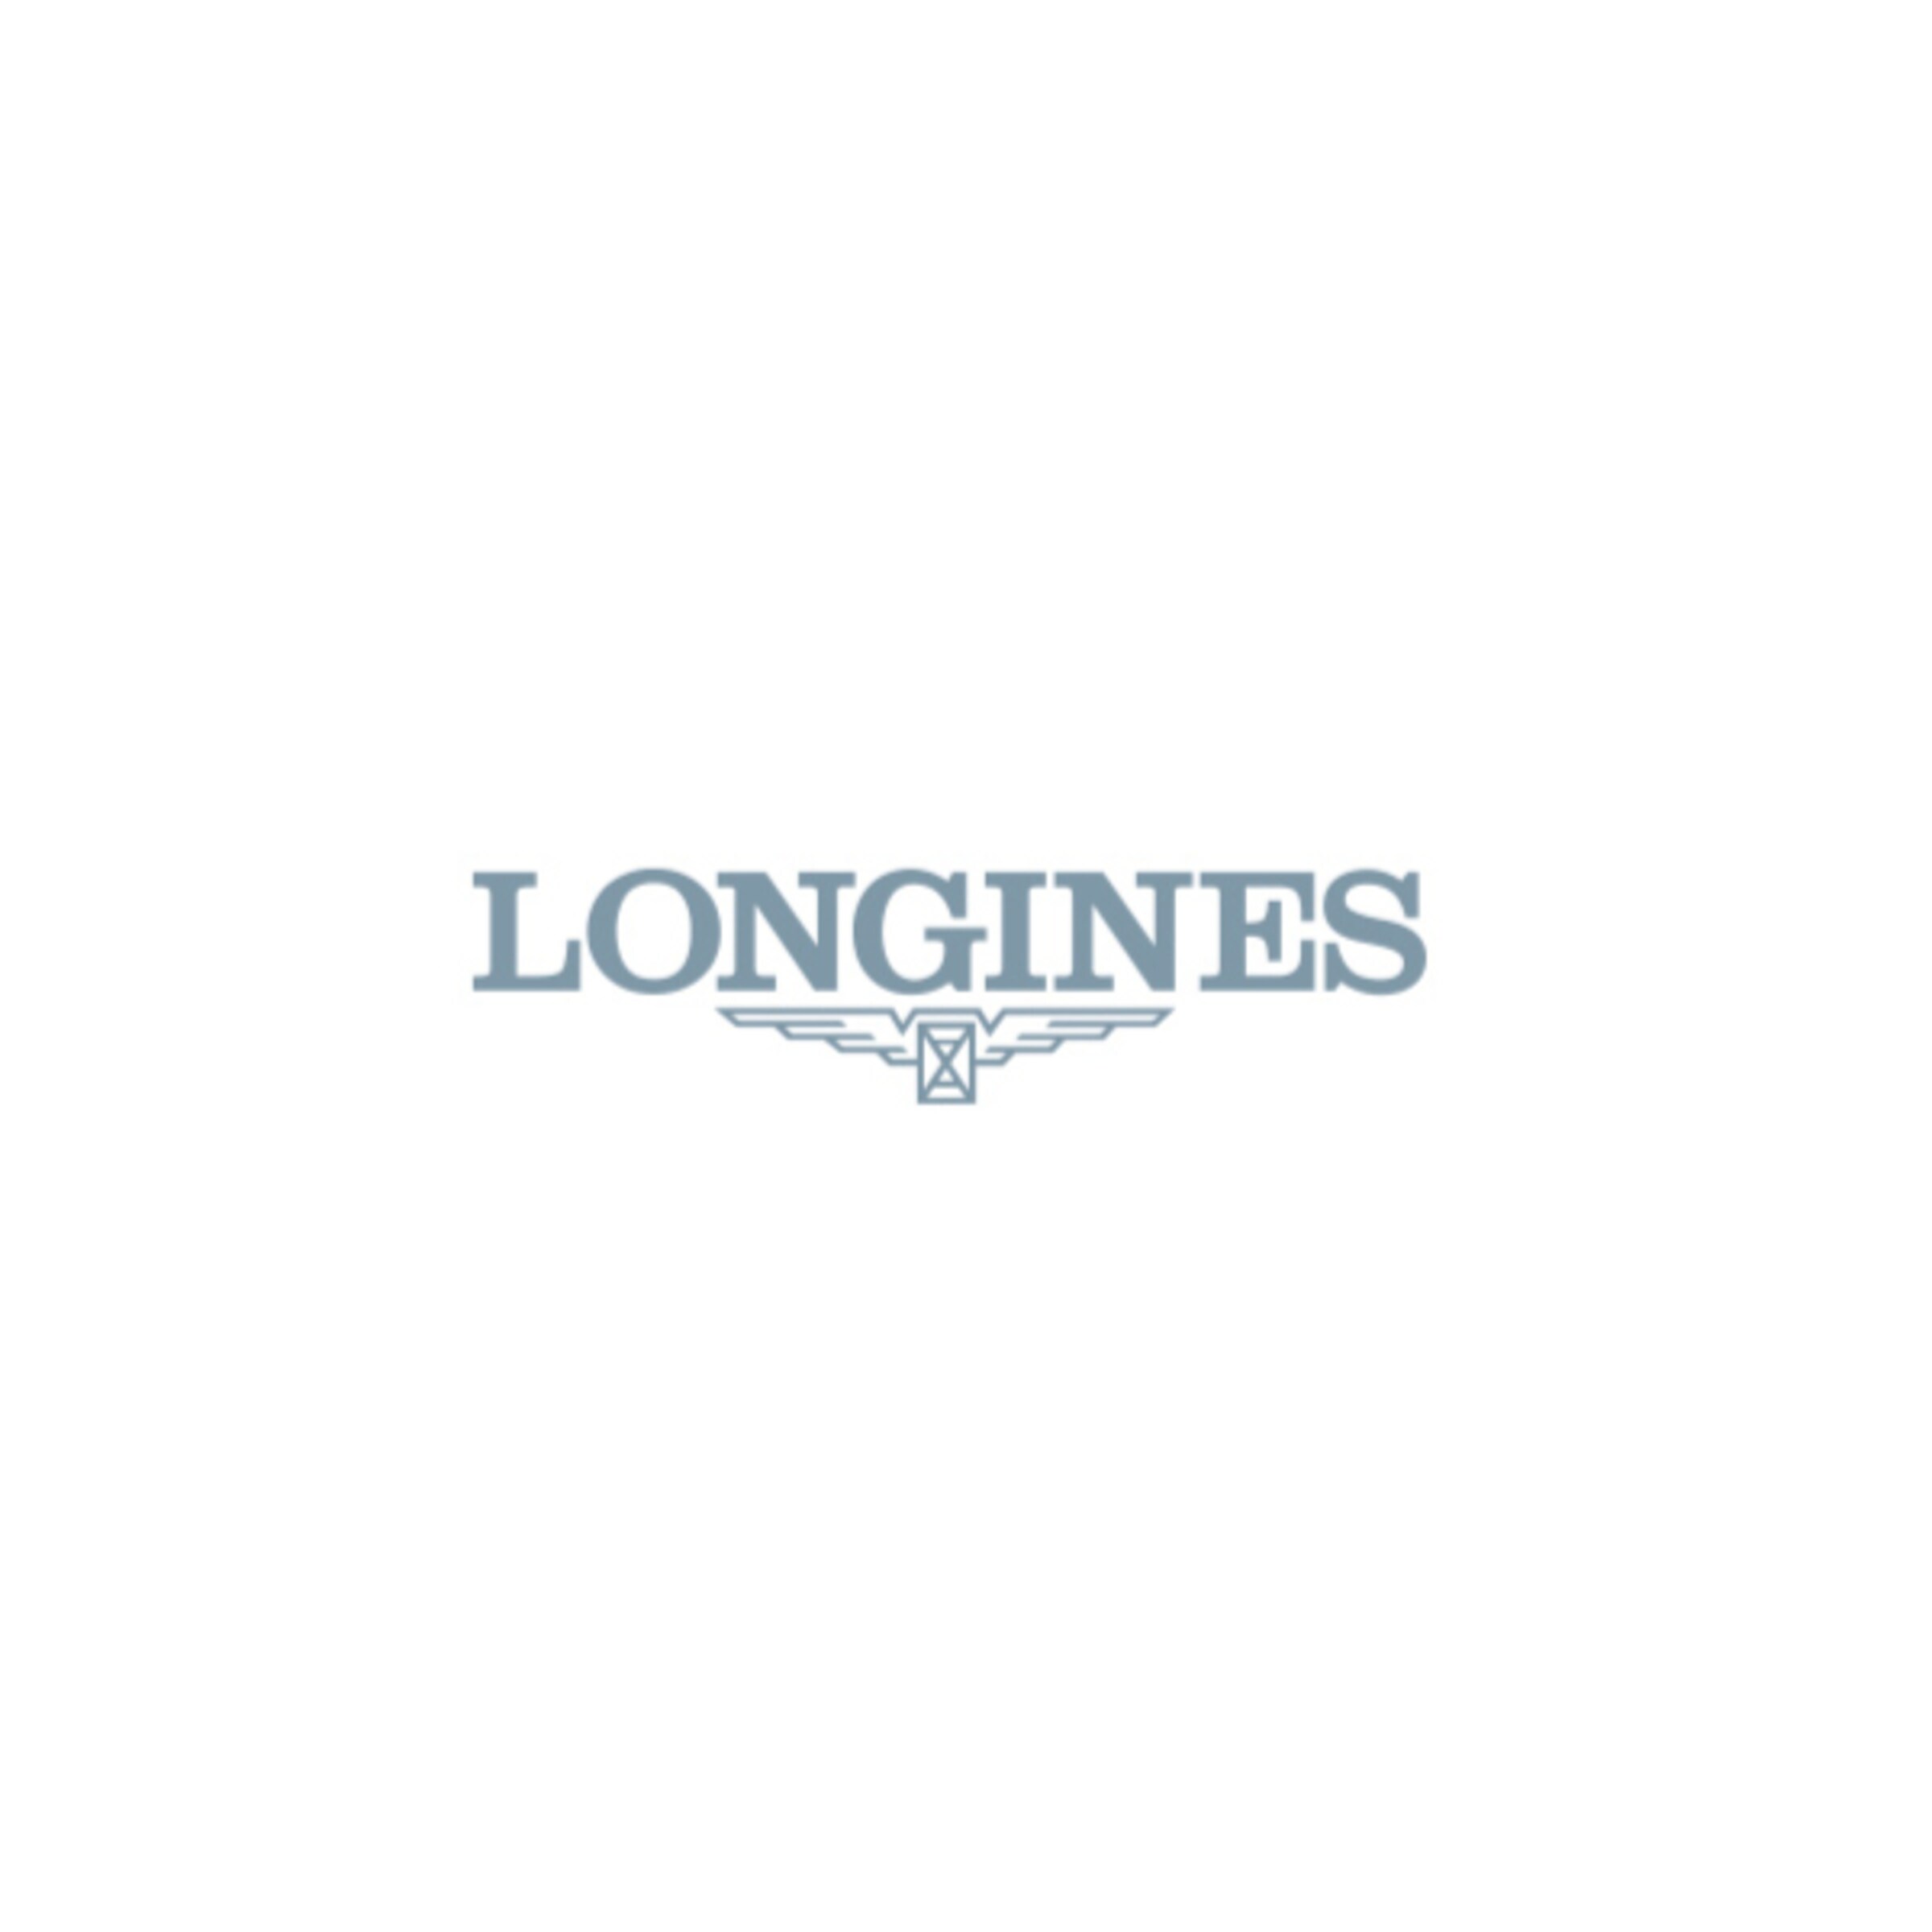 Longines THE LONGINES LEGEND DIVER WATCH Automatic Stainless steel Watch - L3.374.4.40.2